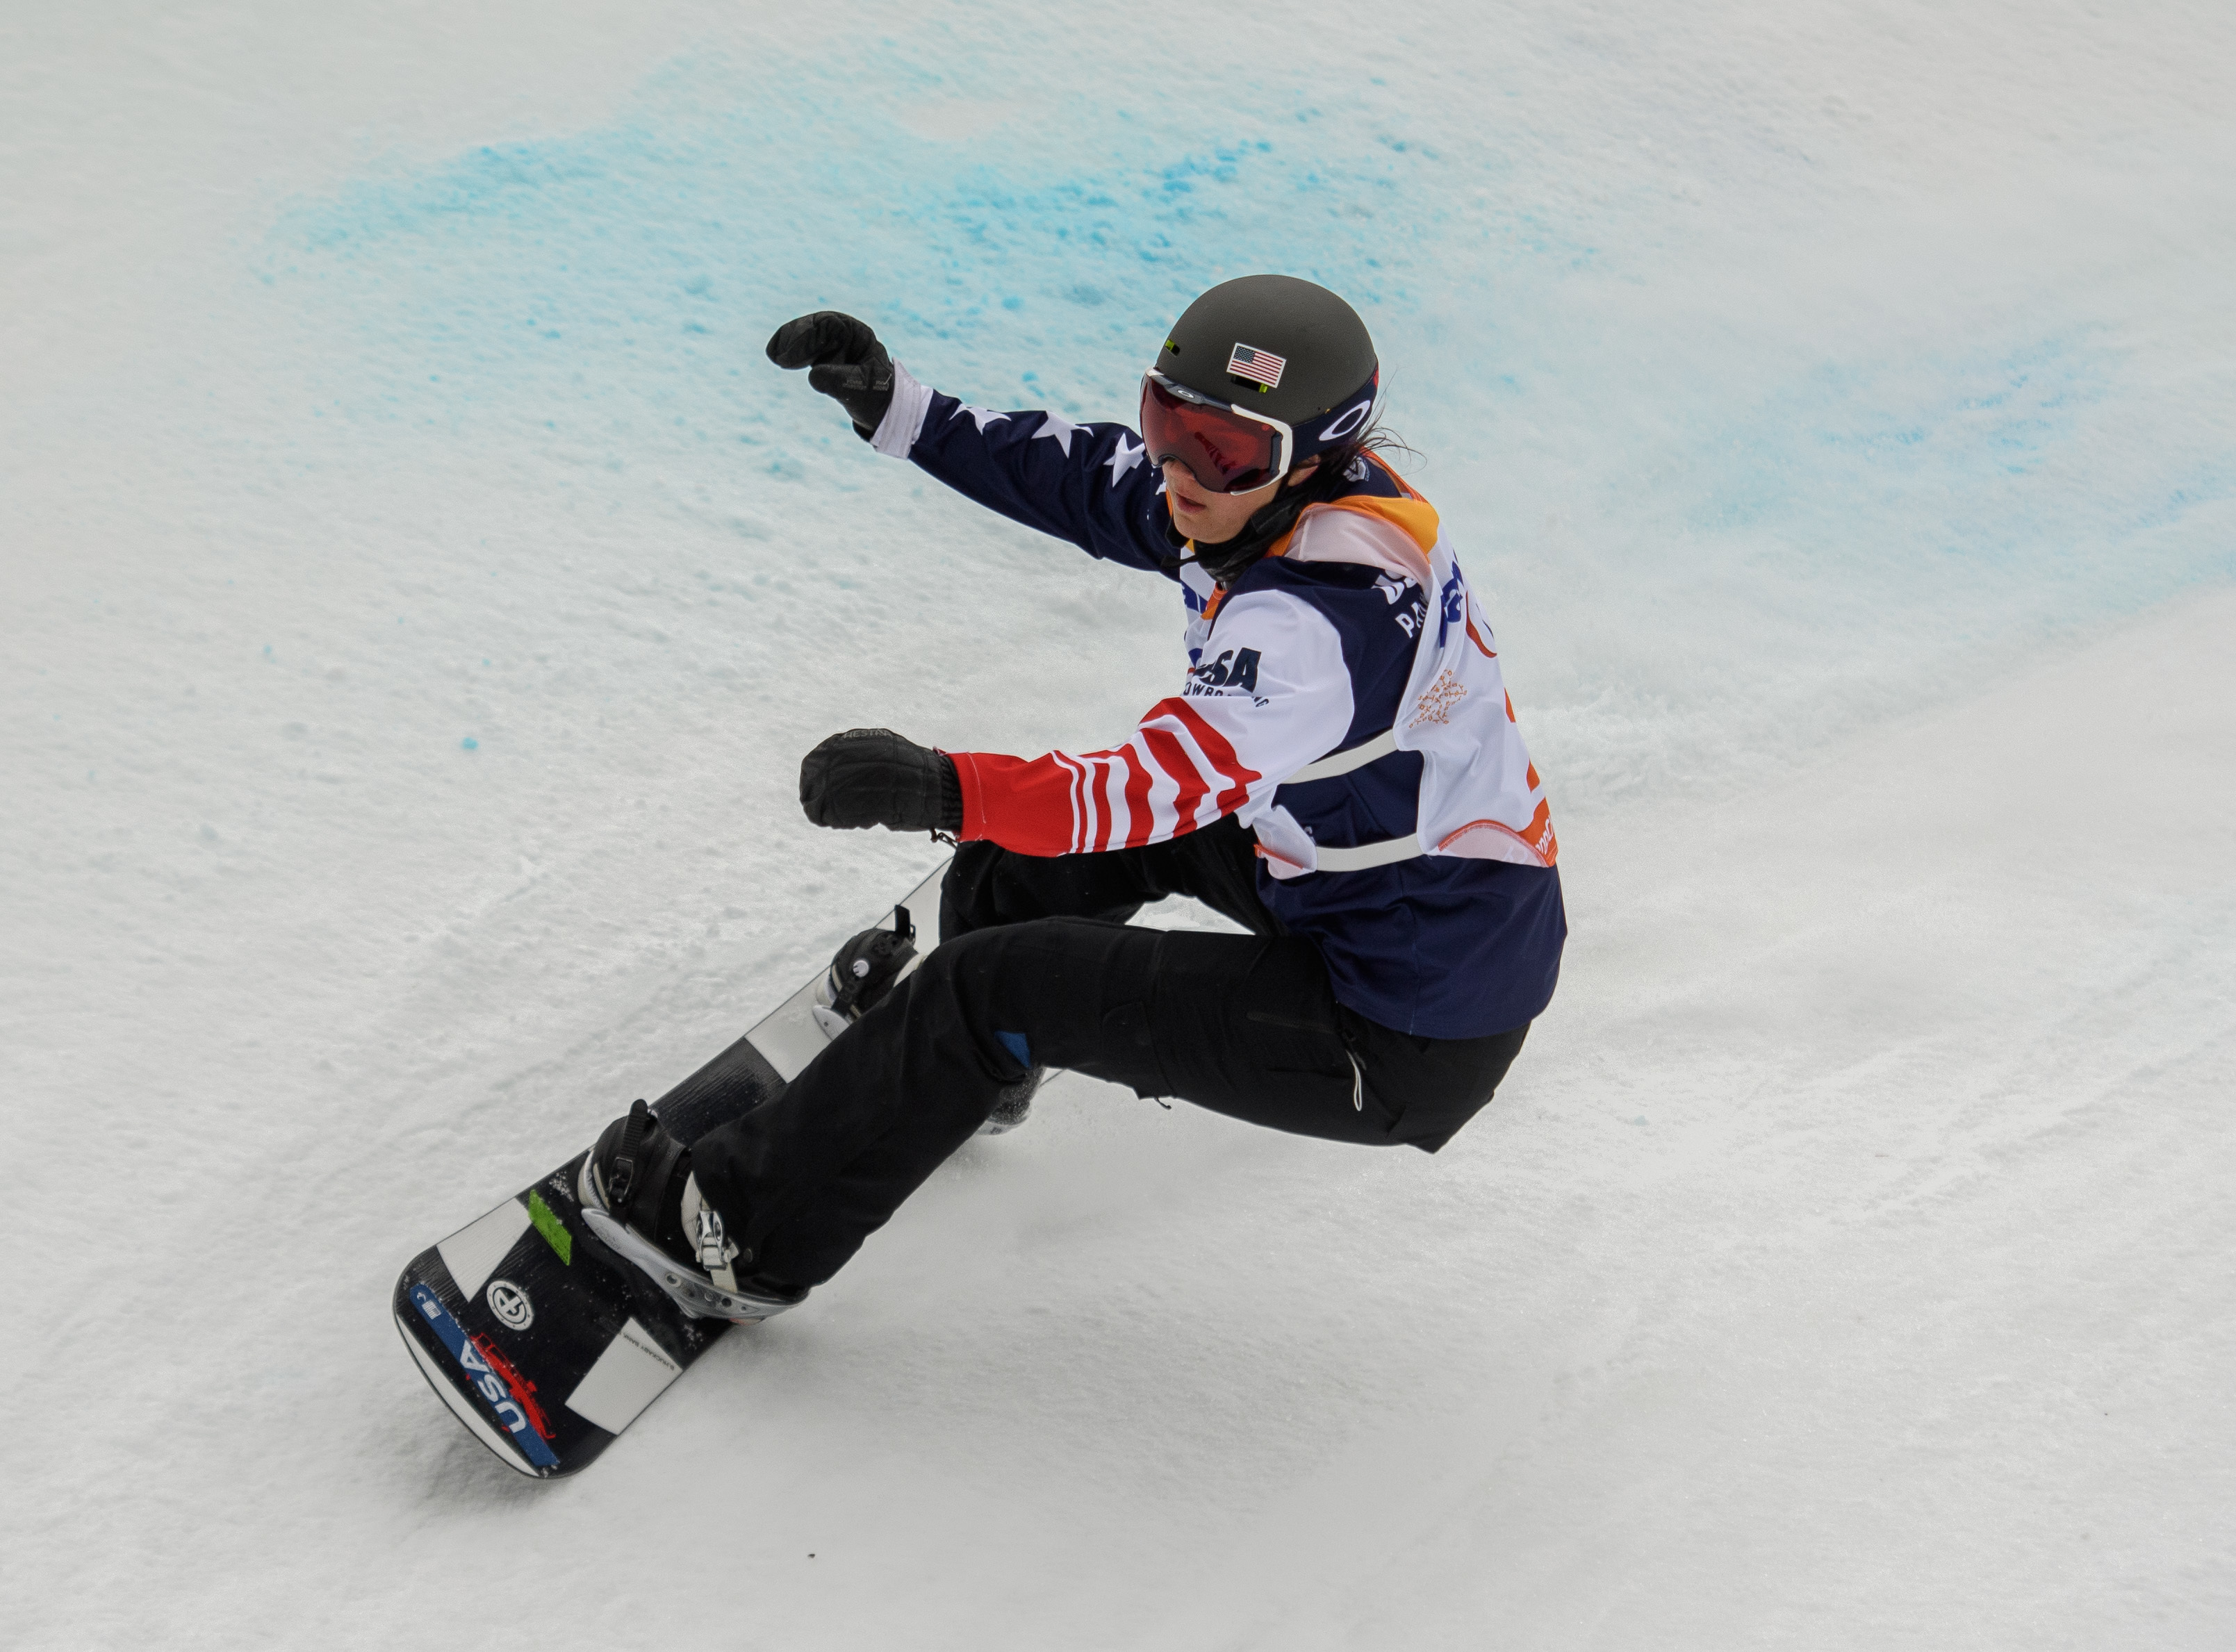 Brenna Huckaby USA competes in the Snowboard Women’s Banked Slalom SB-LL1 Run 3 at the Jeongseon Alpine Centre. The Paralympic Winter Games, PyeongChang, South Korea, Friday 16th March 2018. Photo: Joel Marklund for OIS/IOC. Handout image supplied by OIS/IOC